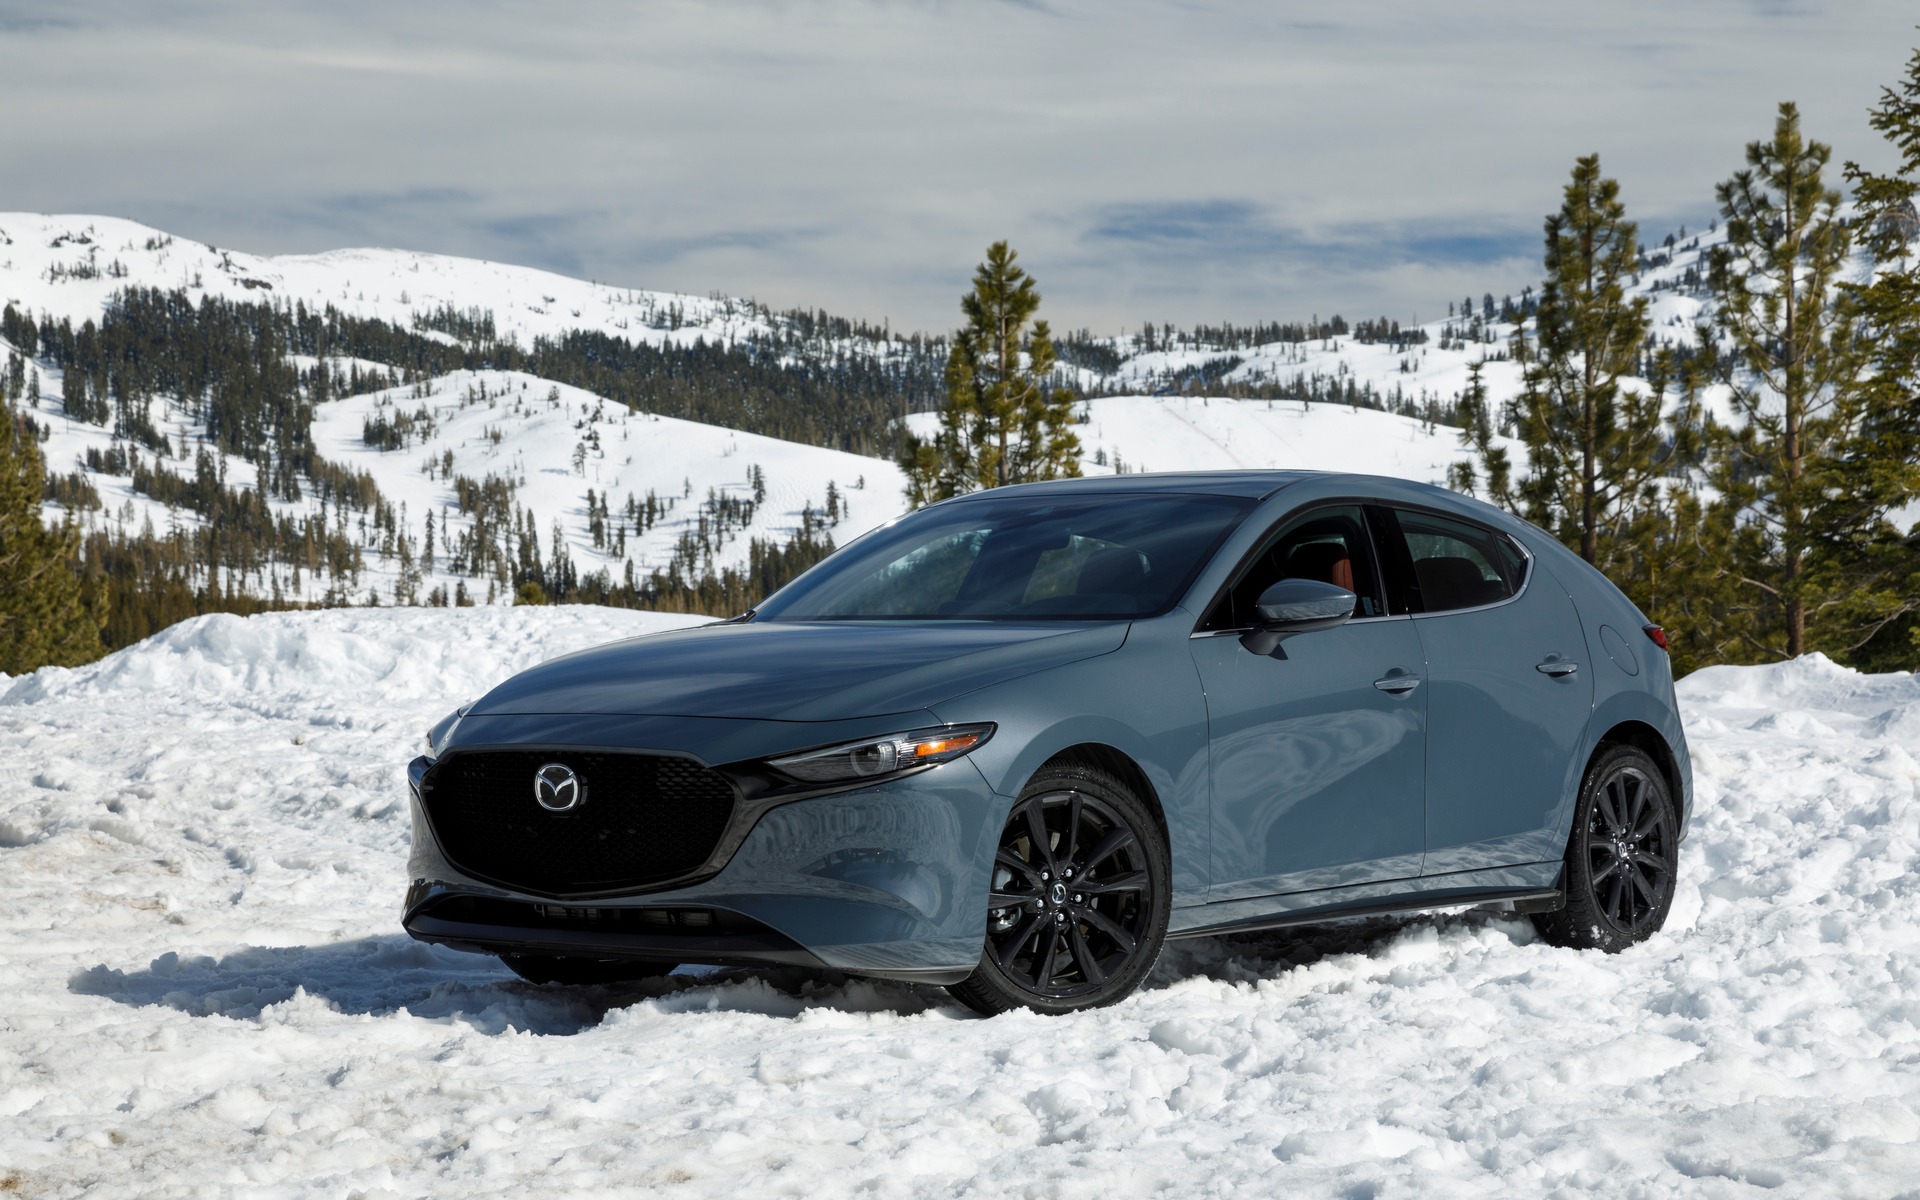 2019 Mazda3 AWD: A Lot More Than All-Wheel Drive - The Car Guide